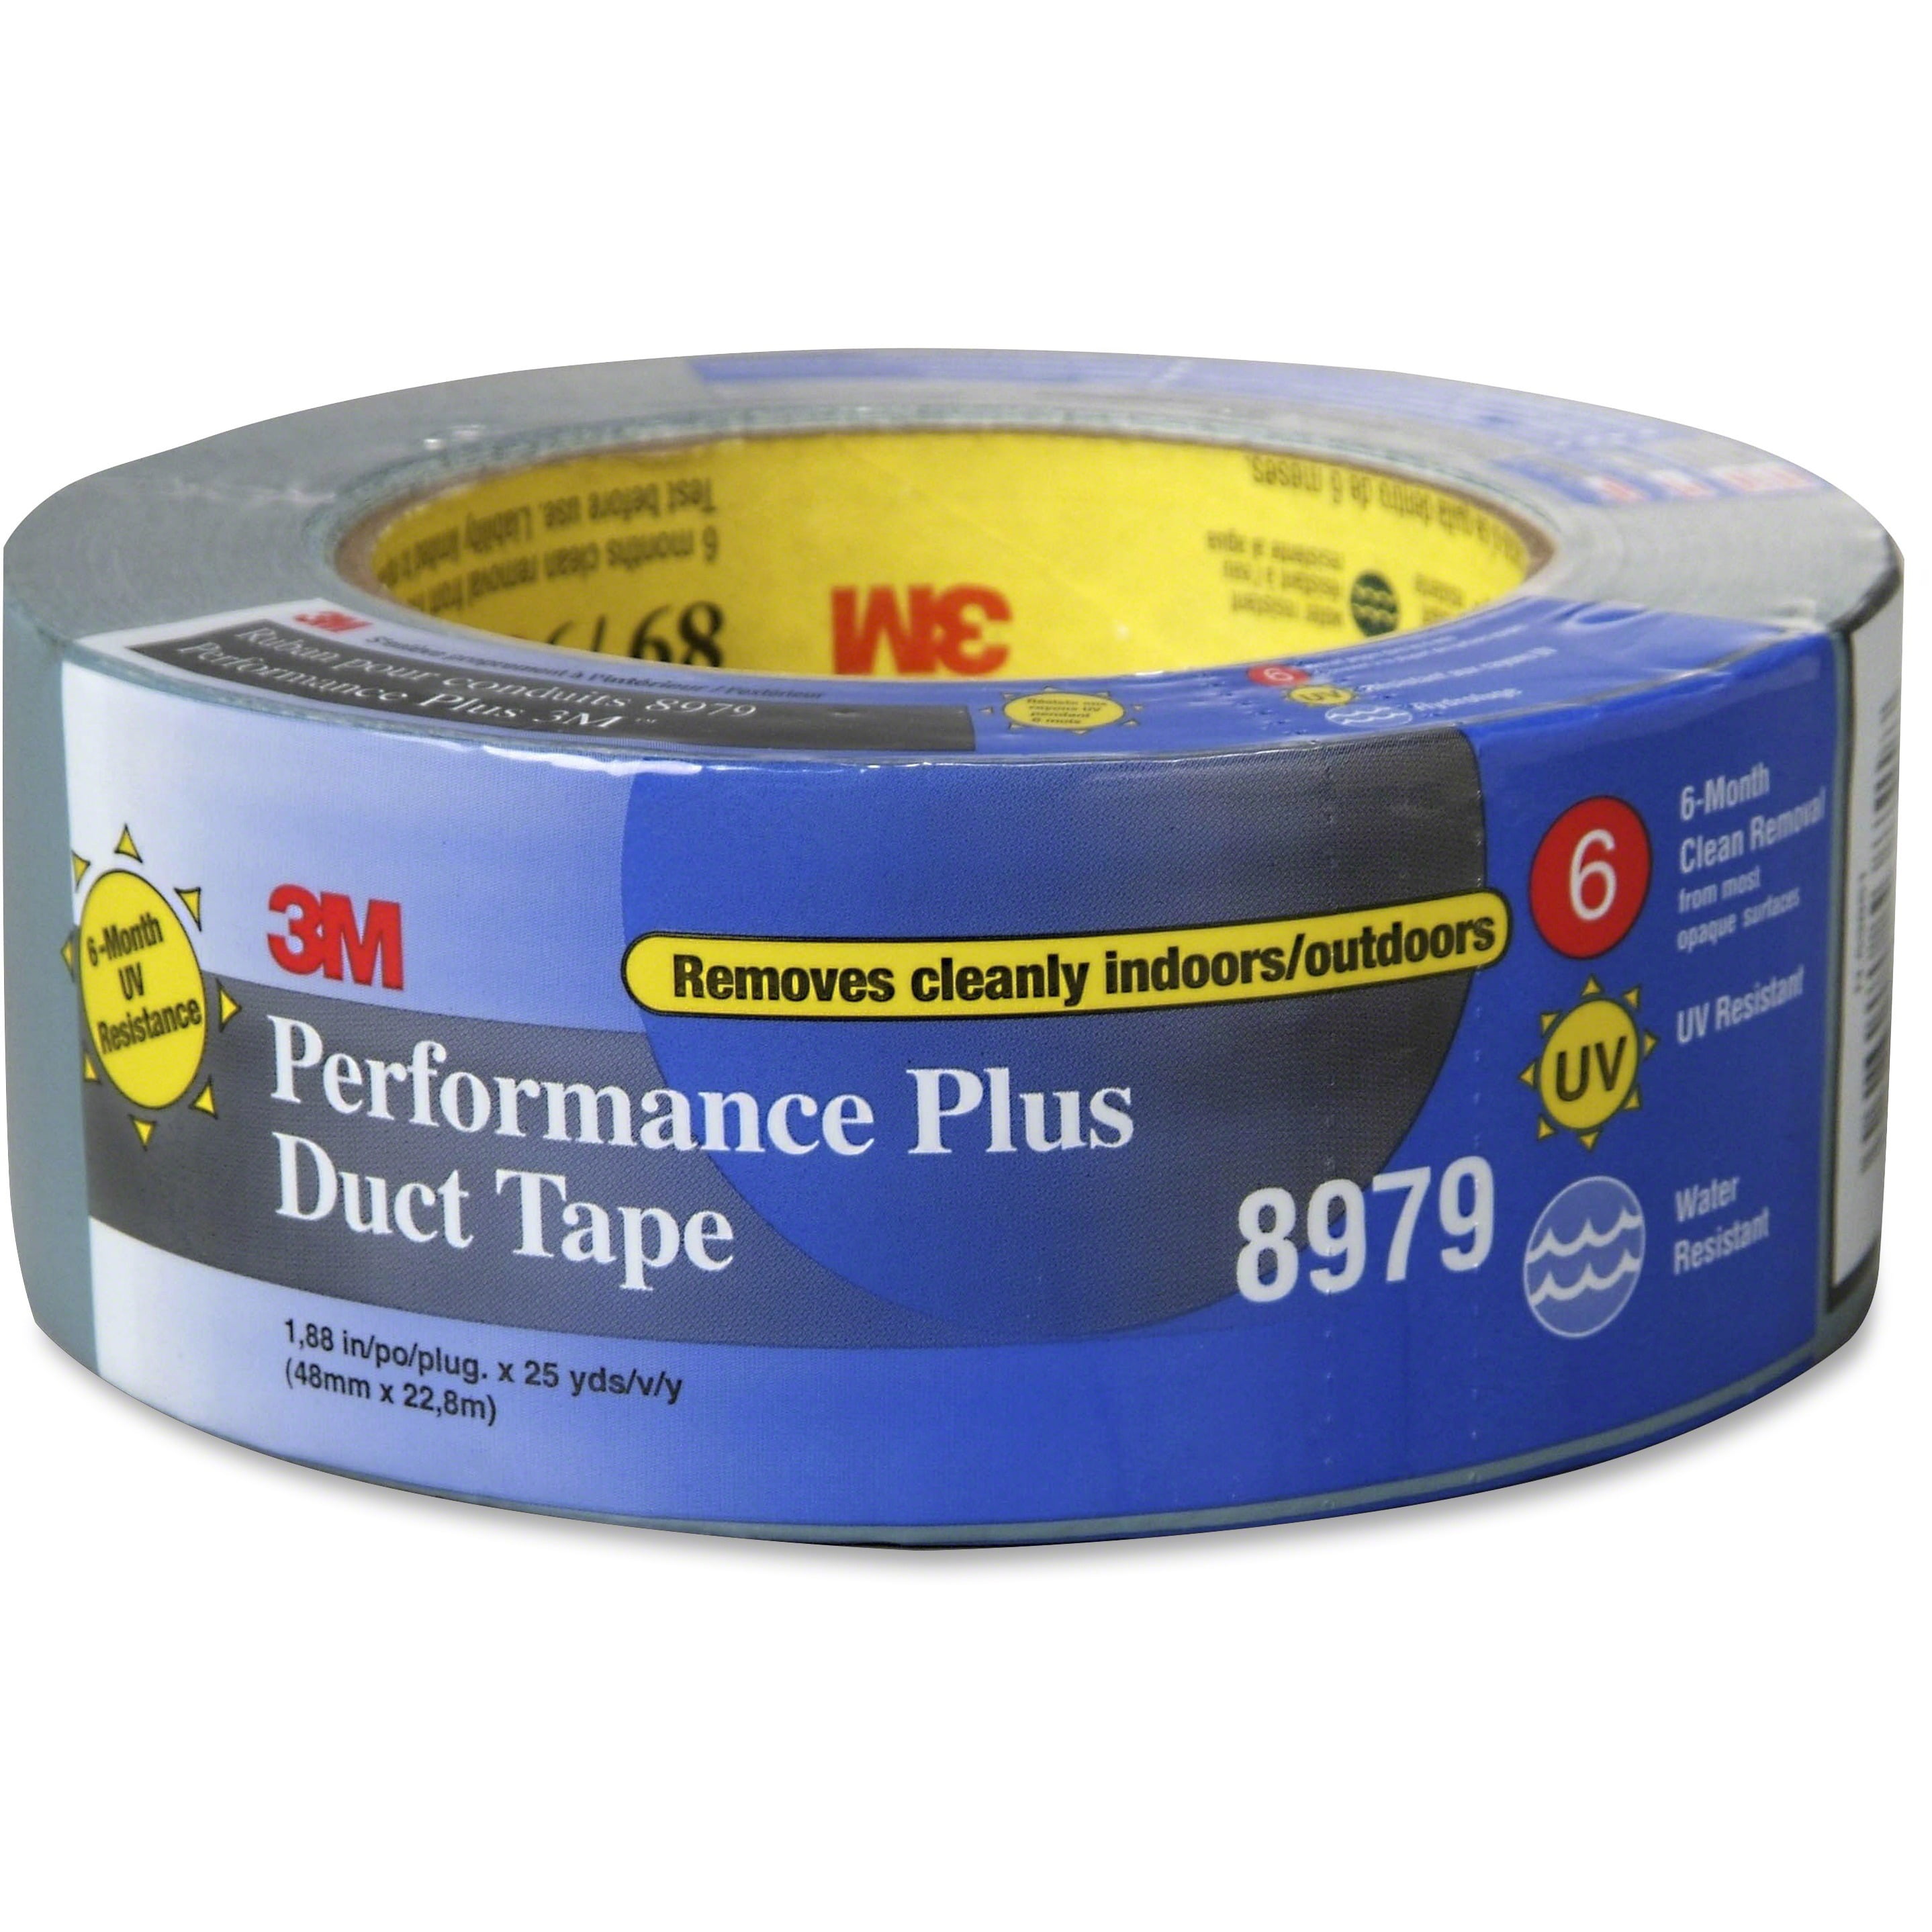 "NEW" 3M 8979 Performance Plus Duct Tape Slate Blue 2 Rolls 12 in x 60 yd 